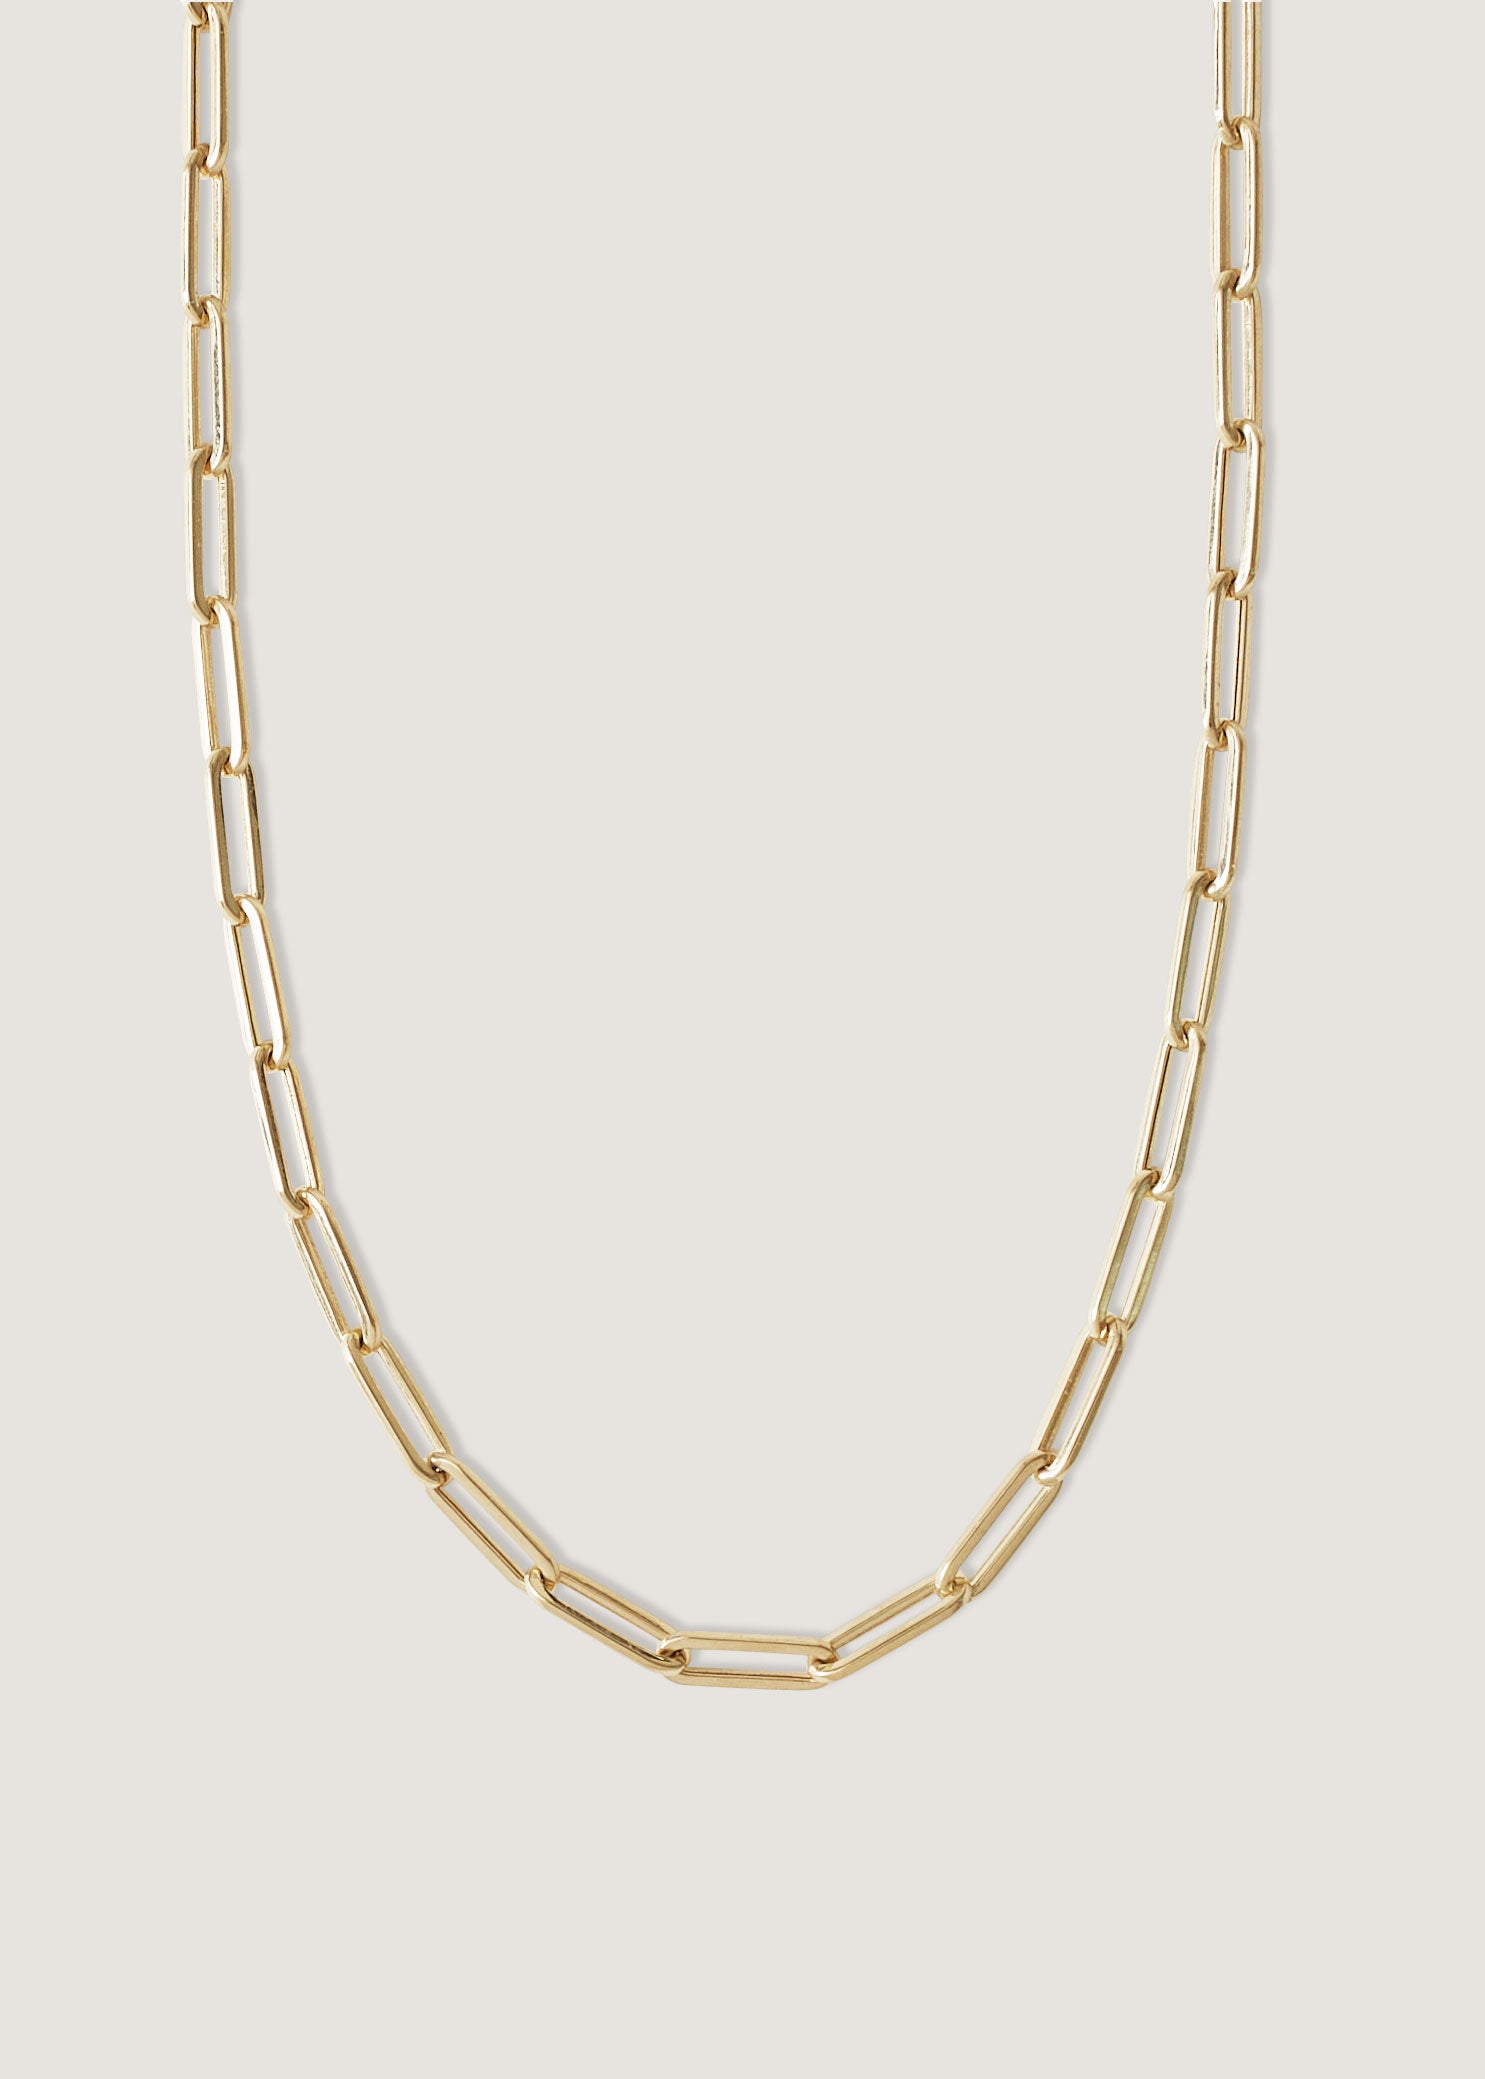 Buy Golden Z Healing Stone Rope Chain Pendant - Accessorize India